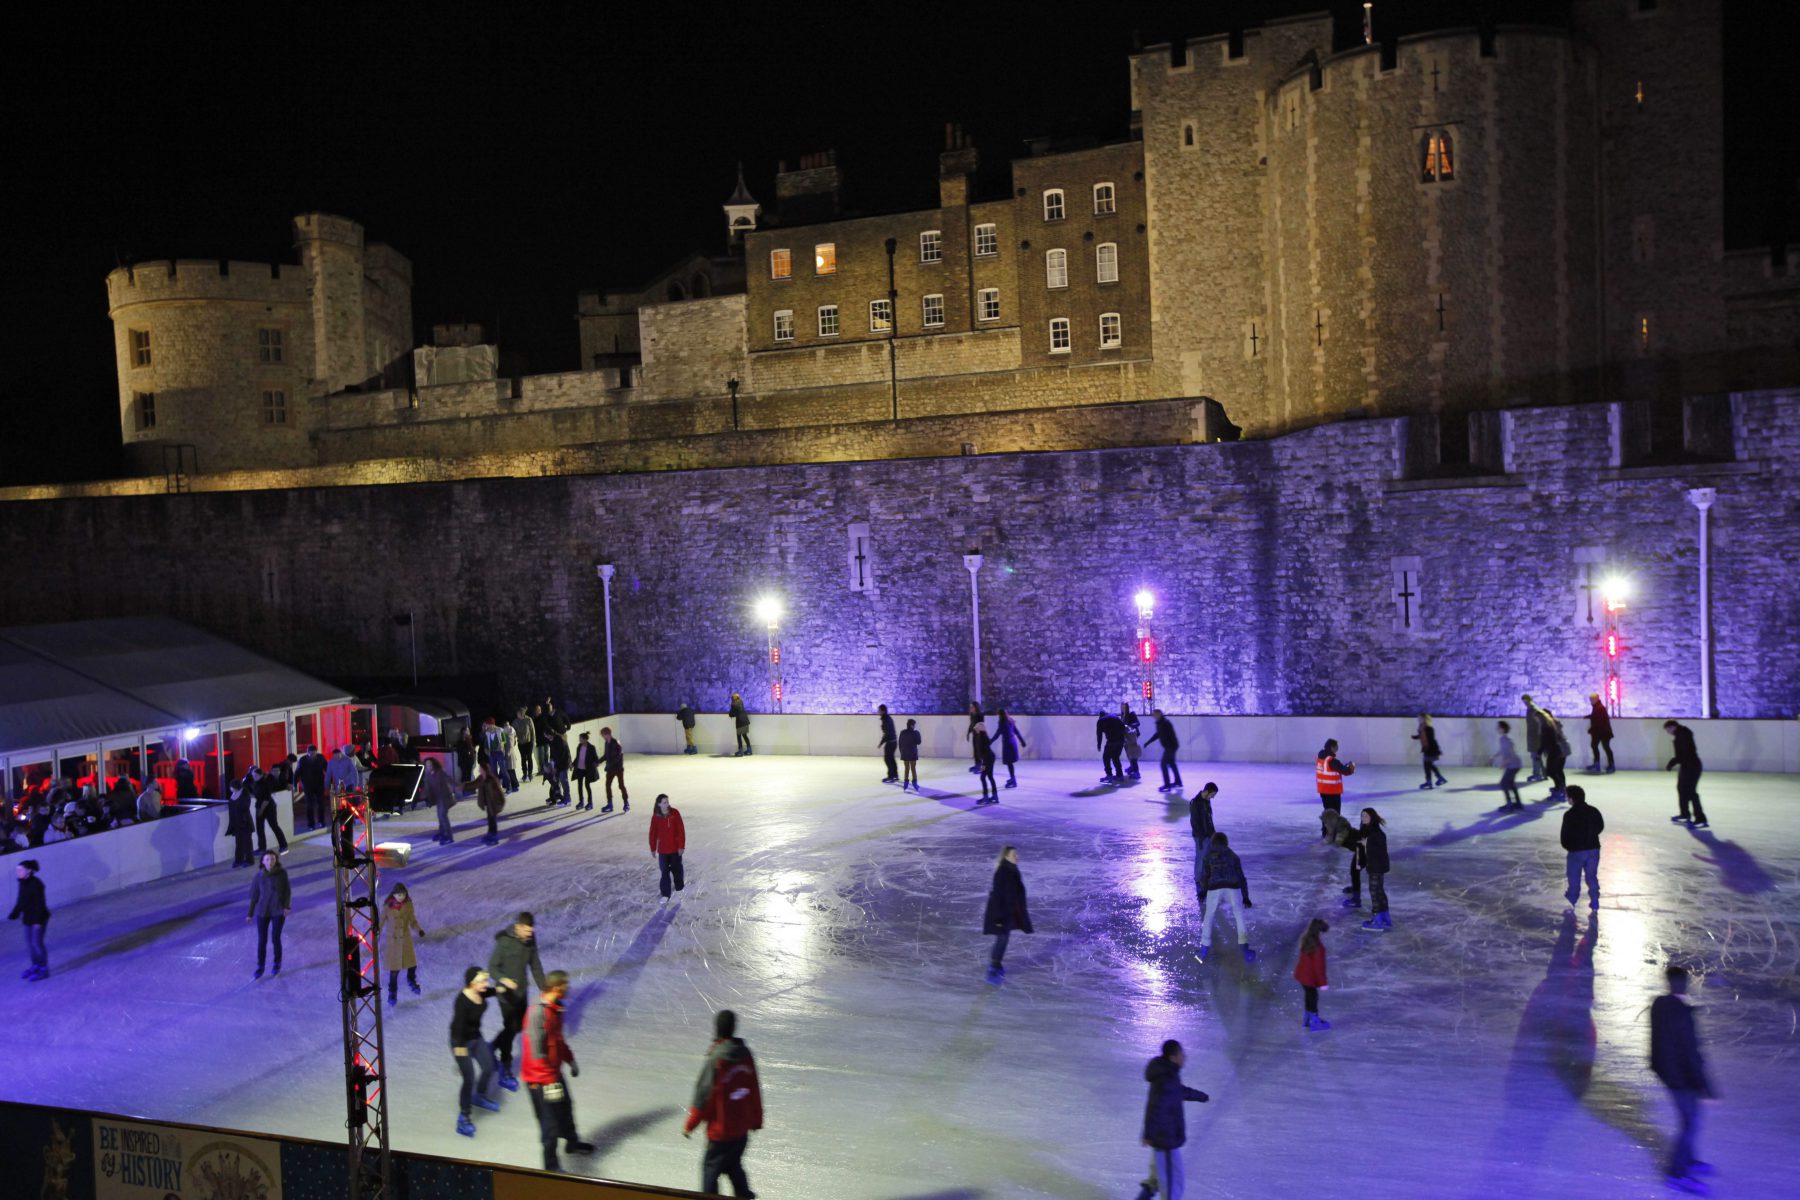 Skaters enjoy playing on the ice rink which has been set up in the moat area in the shadows of the iconic Tower of London, Friday, Nov. 18, 2011. The Tower of London has nearly one thousand years of history as a London fortress, and now plays host to modern families playing on the winter ice rink. (AP Photo/Lefteris Pitarakis)